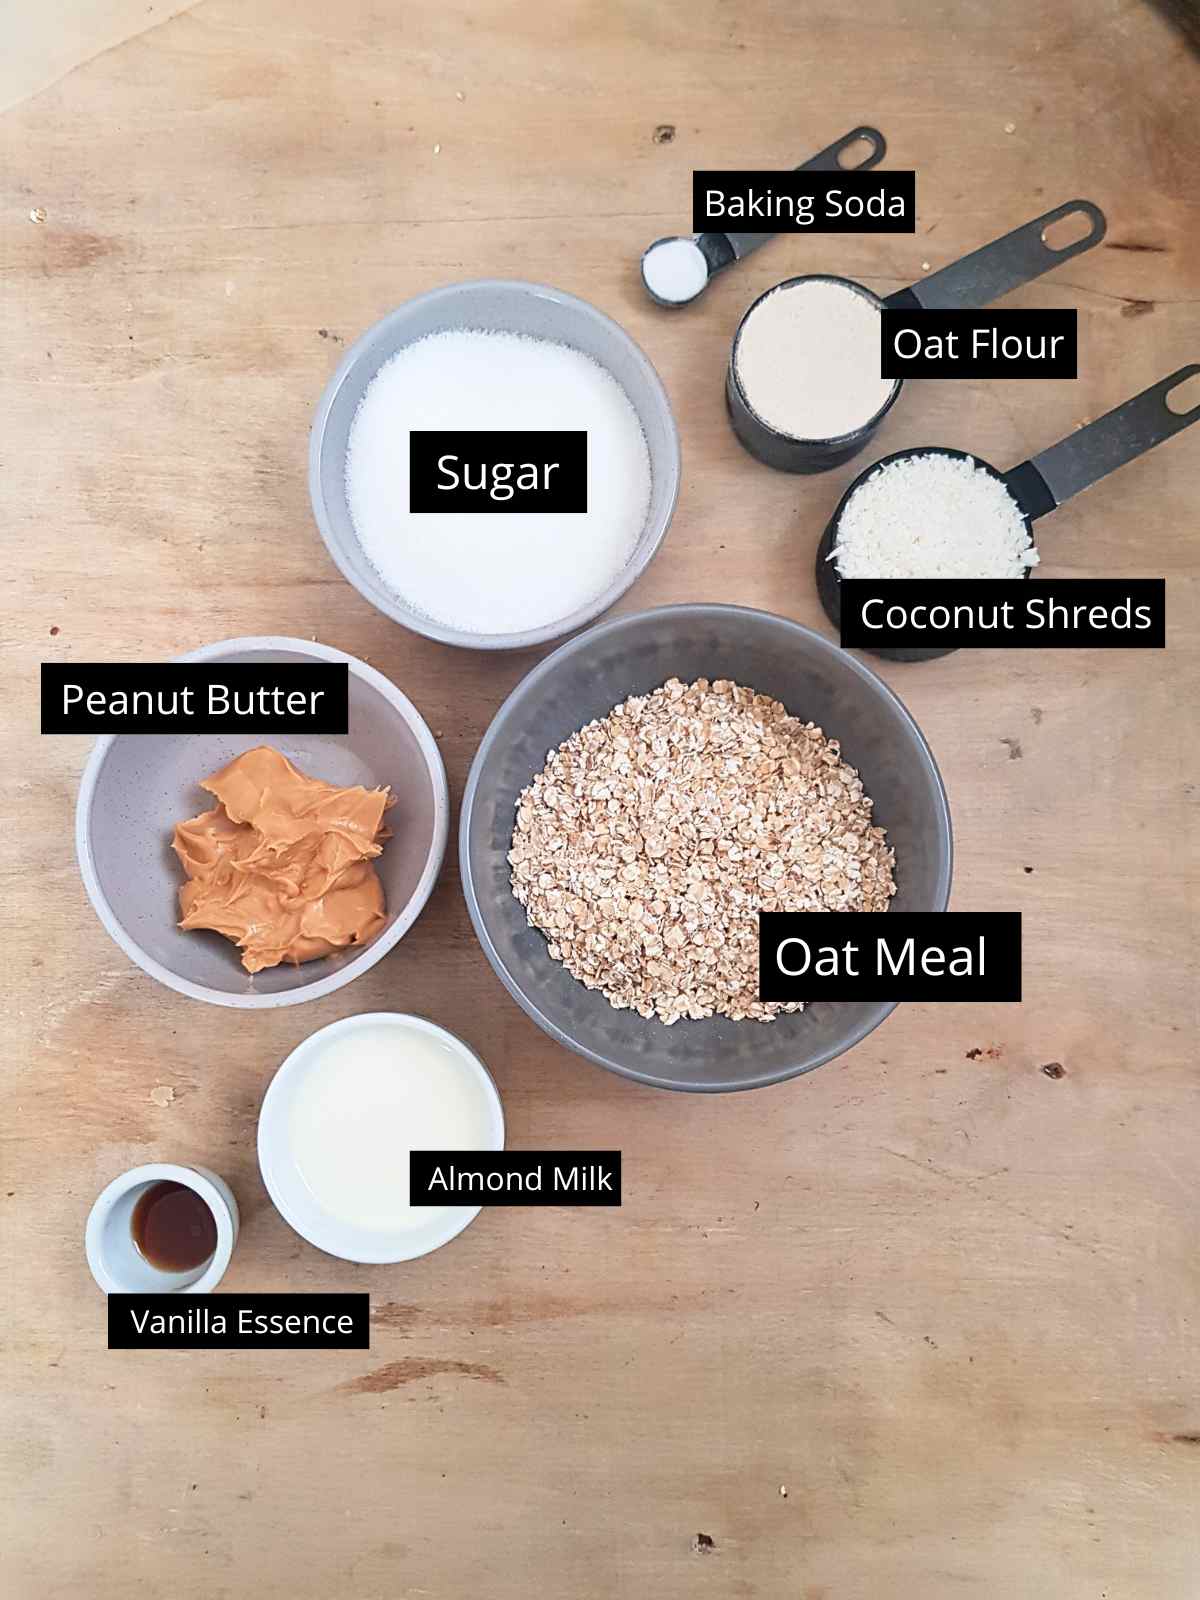 Ingredients to make oatmeal peanut butter cookies.